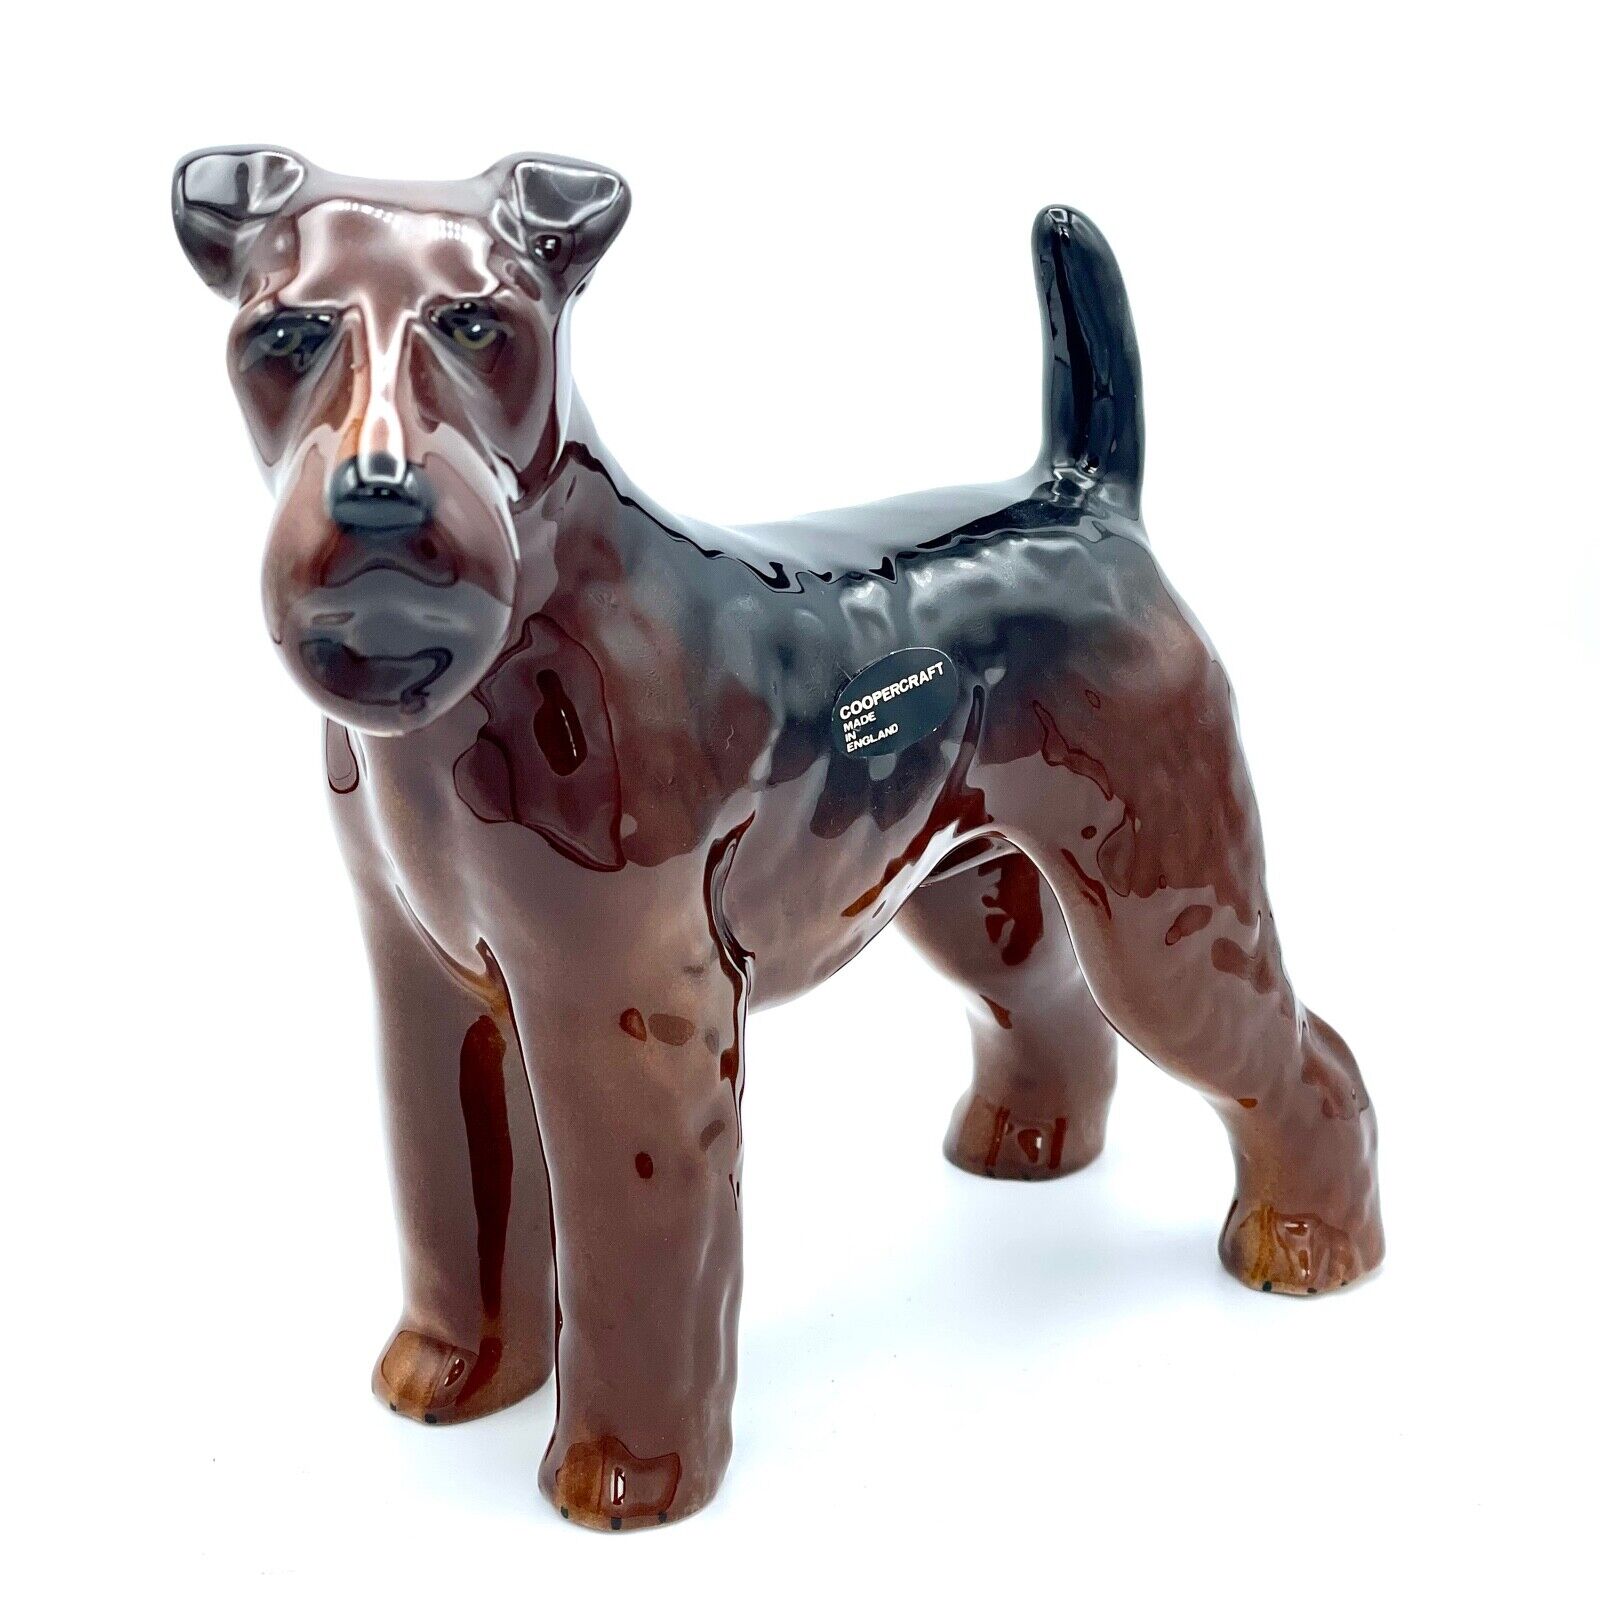 Vintage Coopercraft Airedale Terrier Figurine High Gloss Finish 7 inches tall